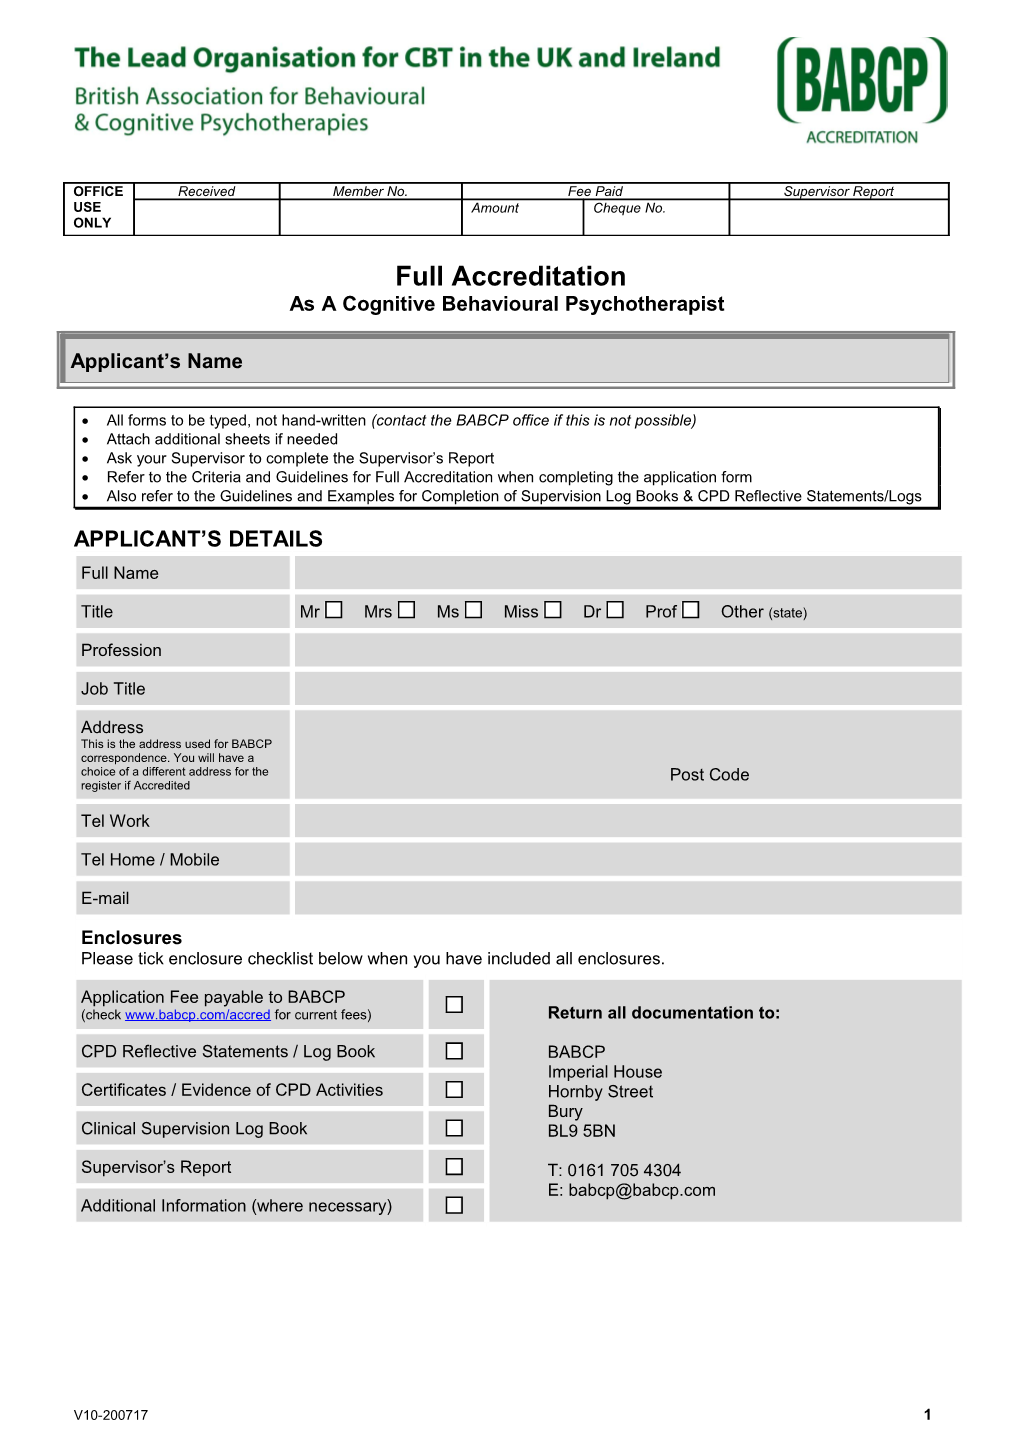 Application for Full Accreditation